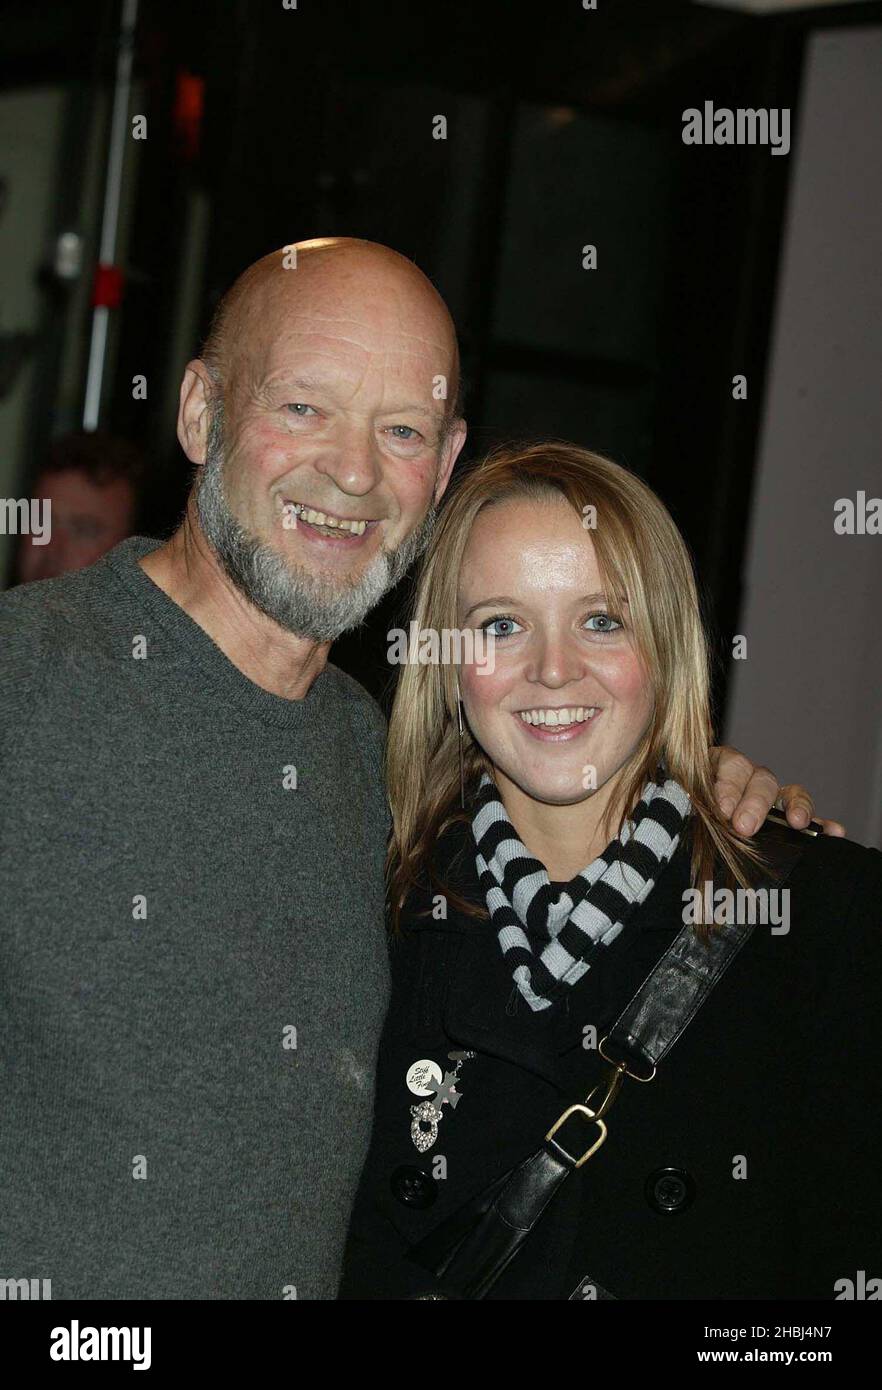 Michael Eavis and daughter Emily at arrivals at the Q Awards, Park Lane Hotel London. Head shot Stock Photo